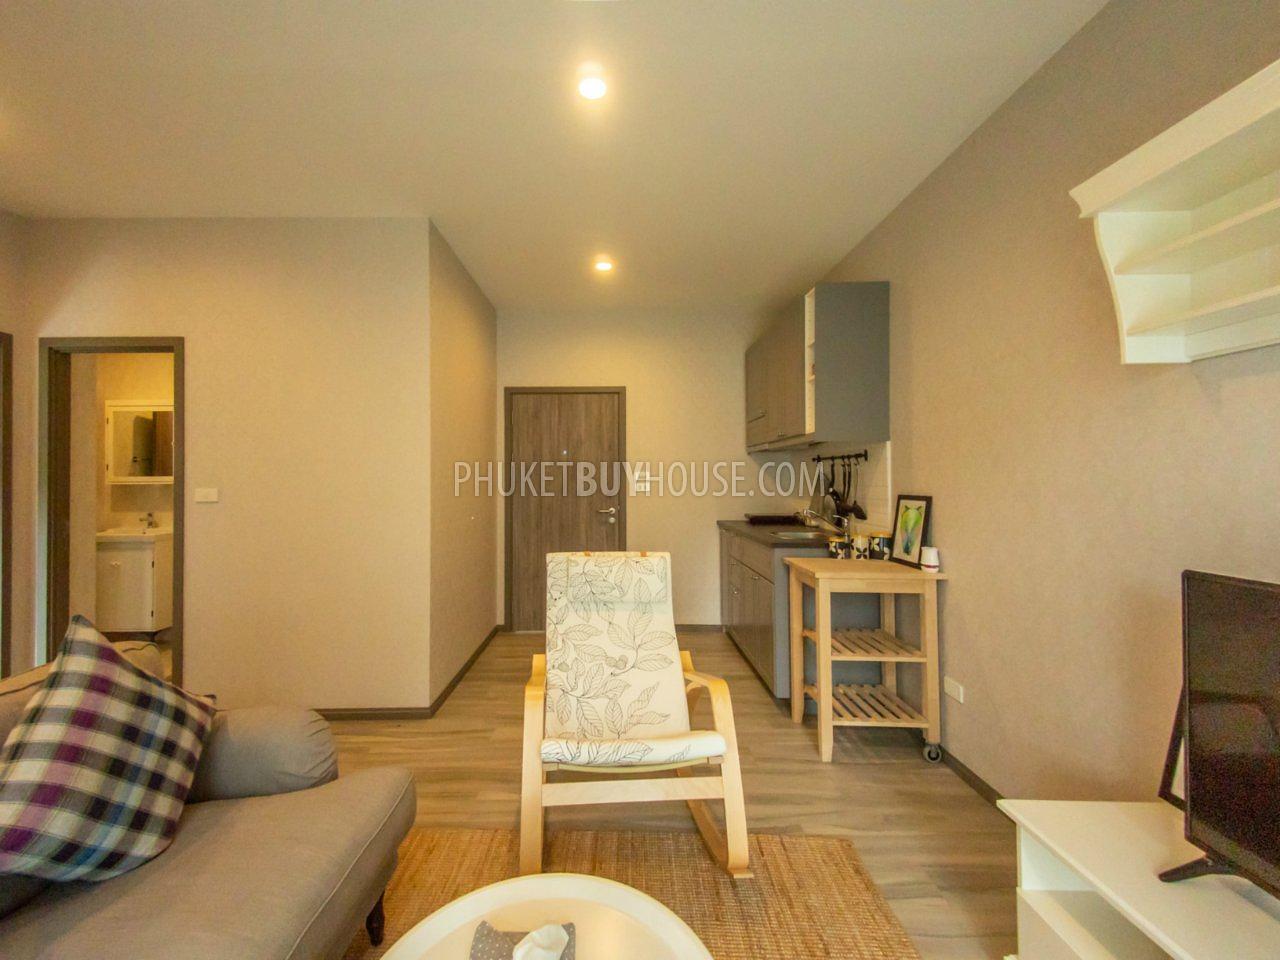 NAY6197: 1 Bedroom Apartment in a New Project within Walking Distance to Nai Yang Beach. Photo #2